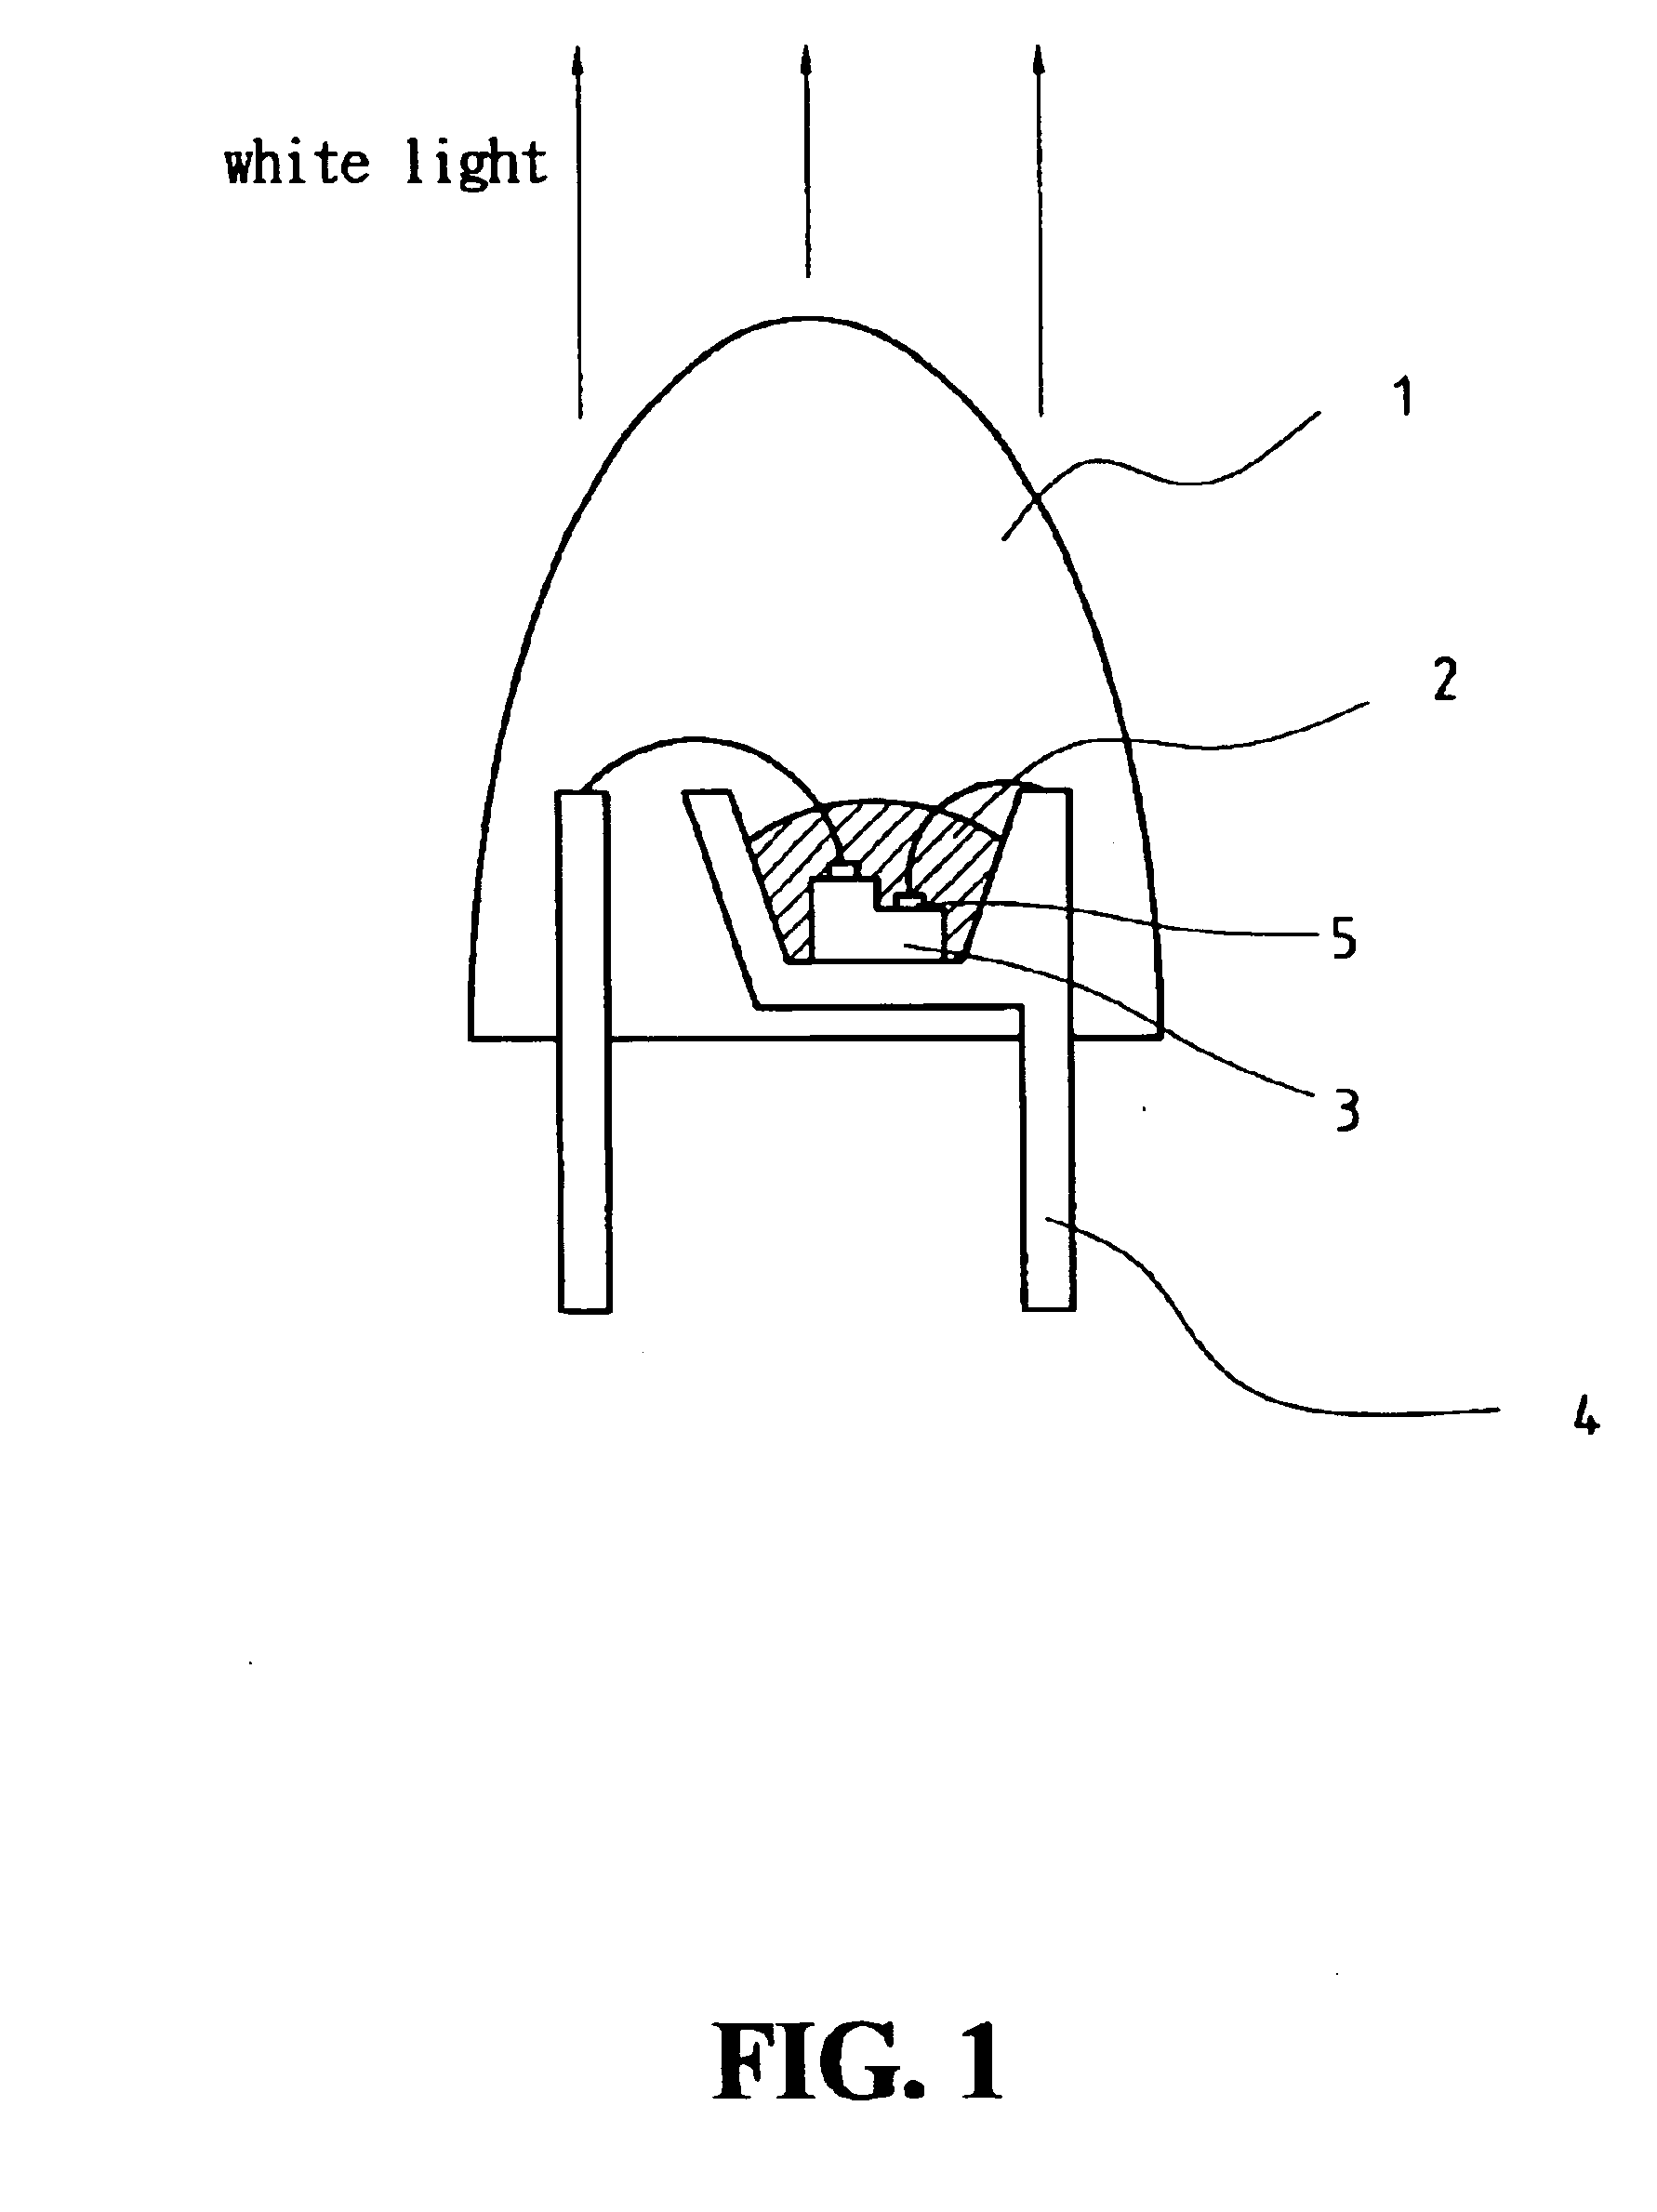 Device of white light-emitting diode